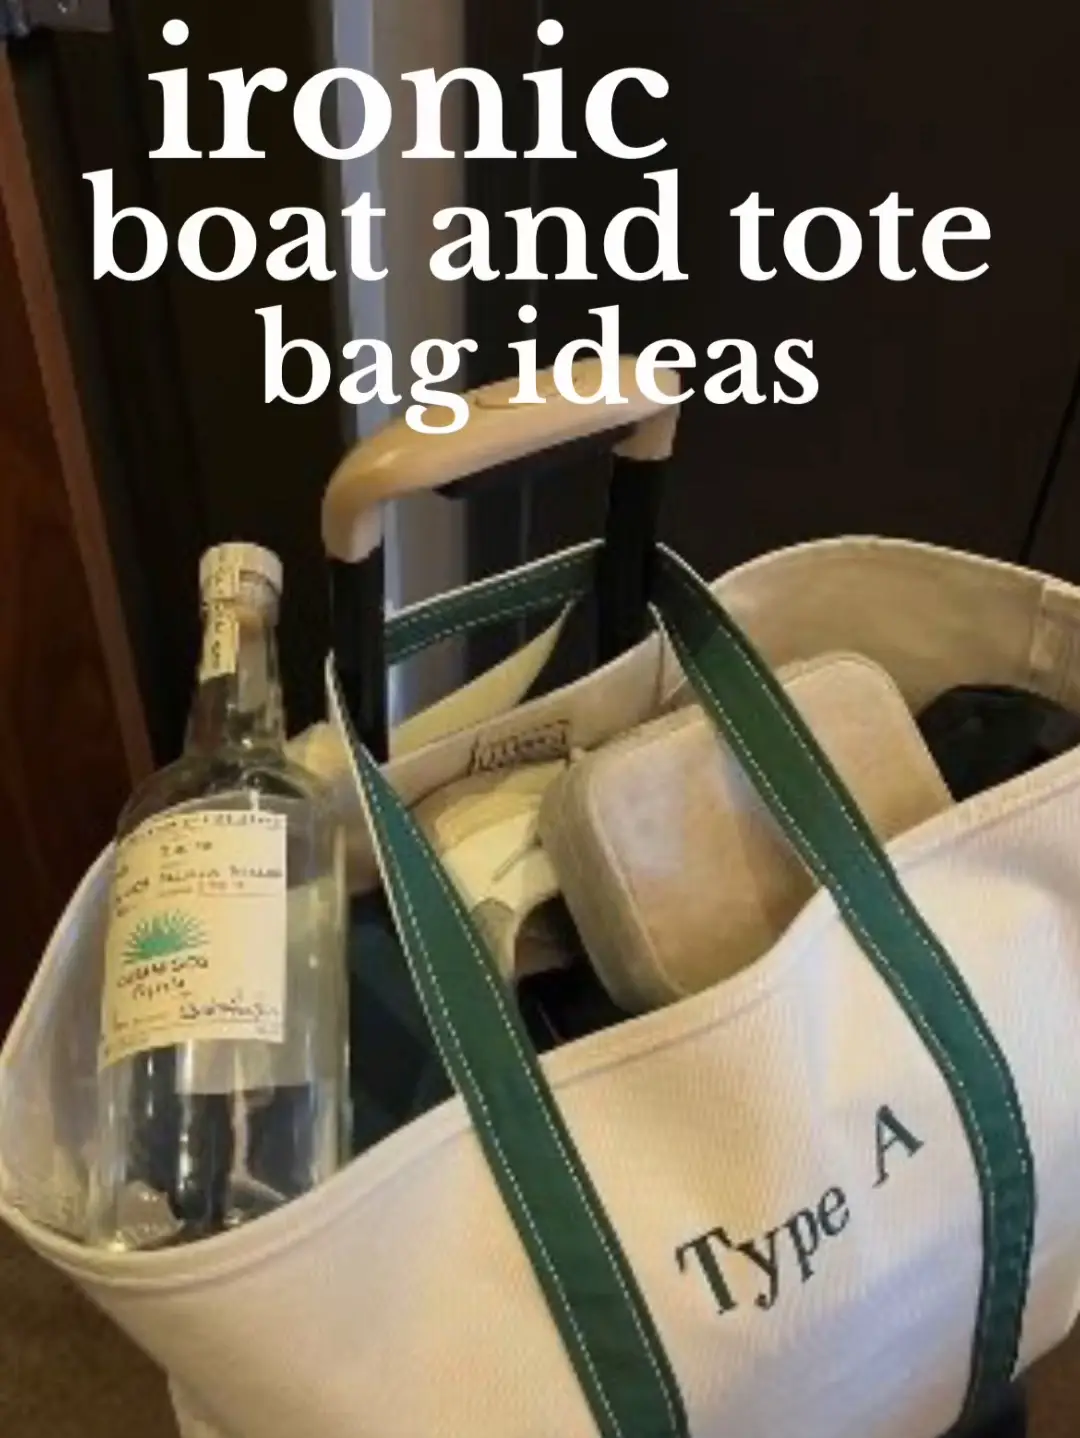 Ironic L.L. Bean boat and tote monograms, Video published by Wren L